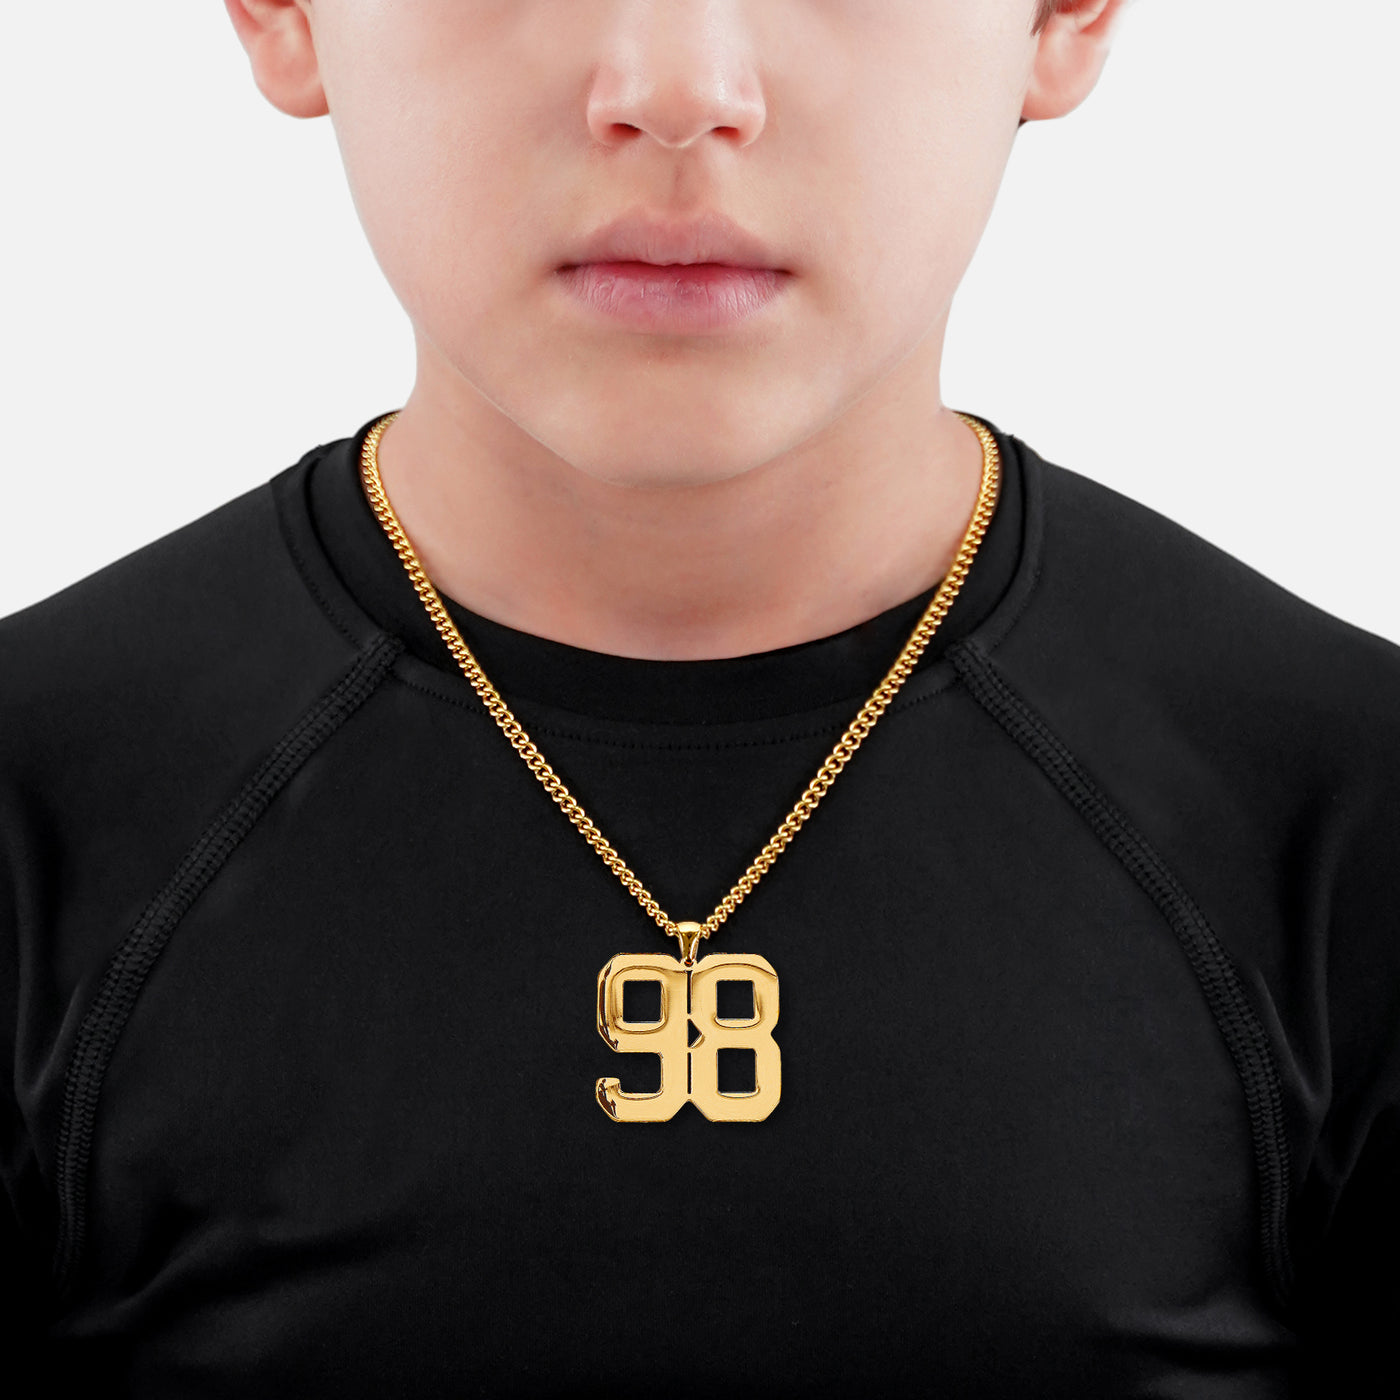 98 Number Pendant with Chain Kids Necklace - Gold Plated Stainless Steel